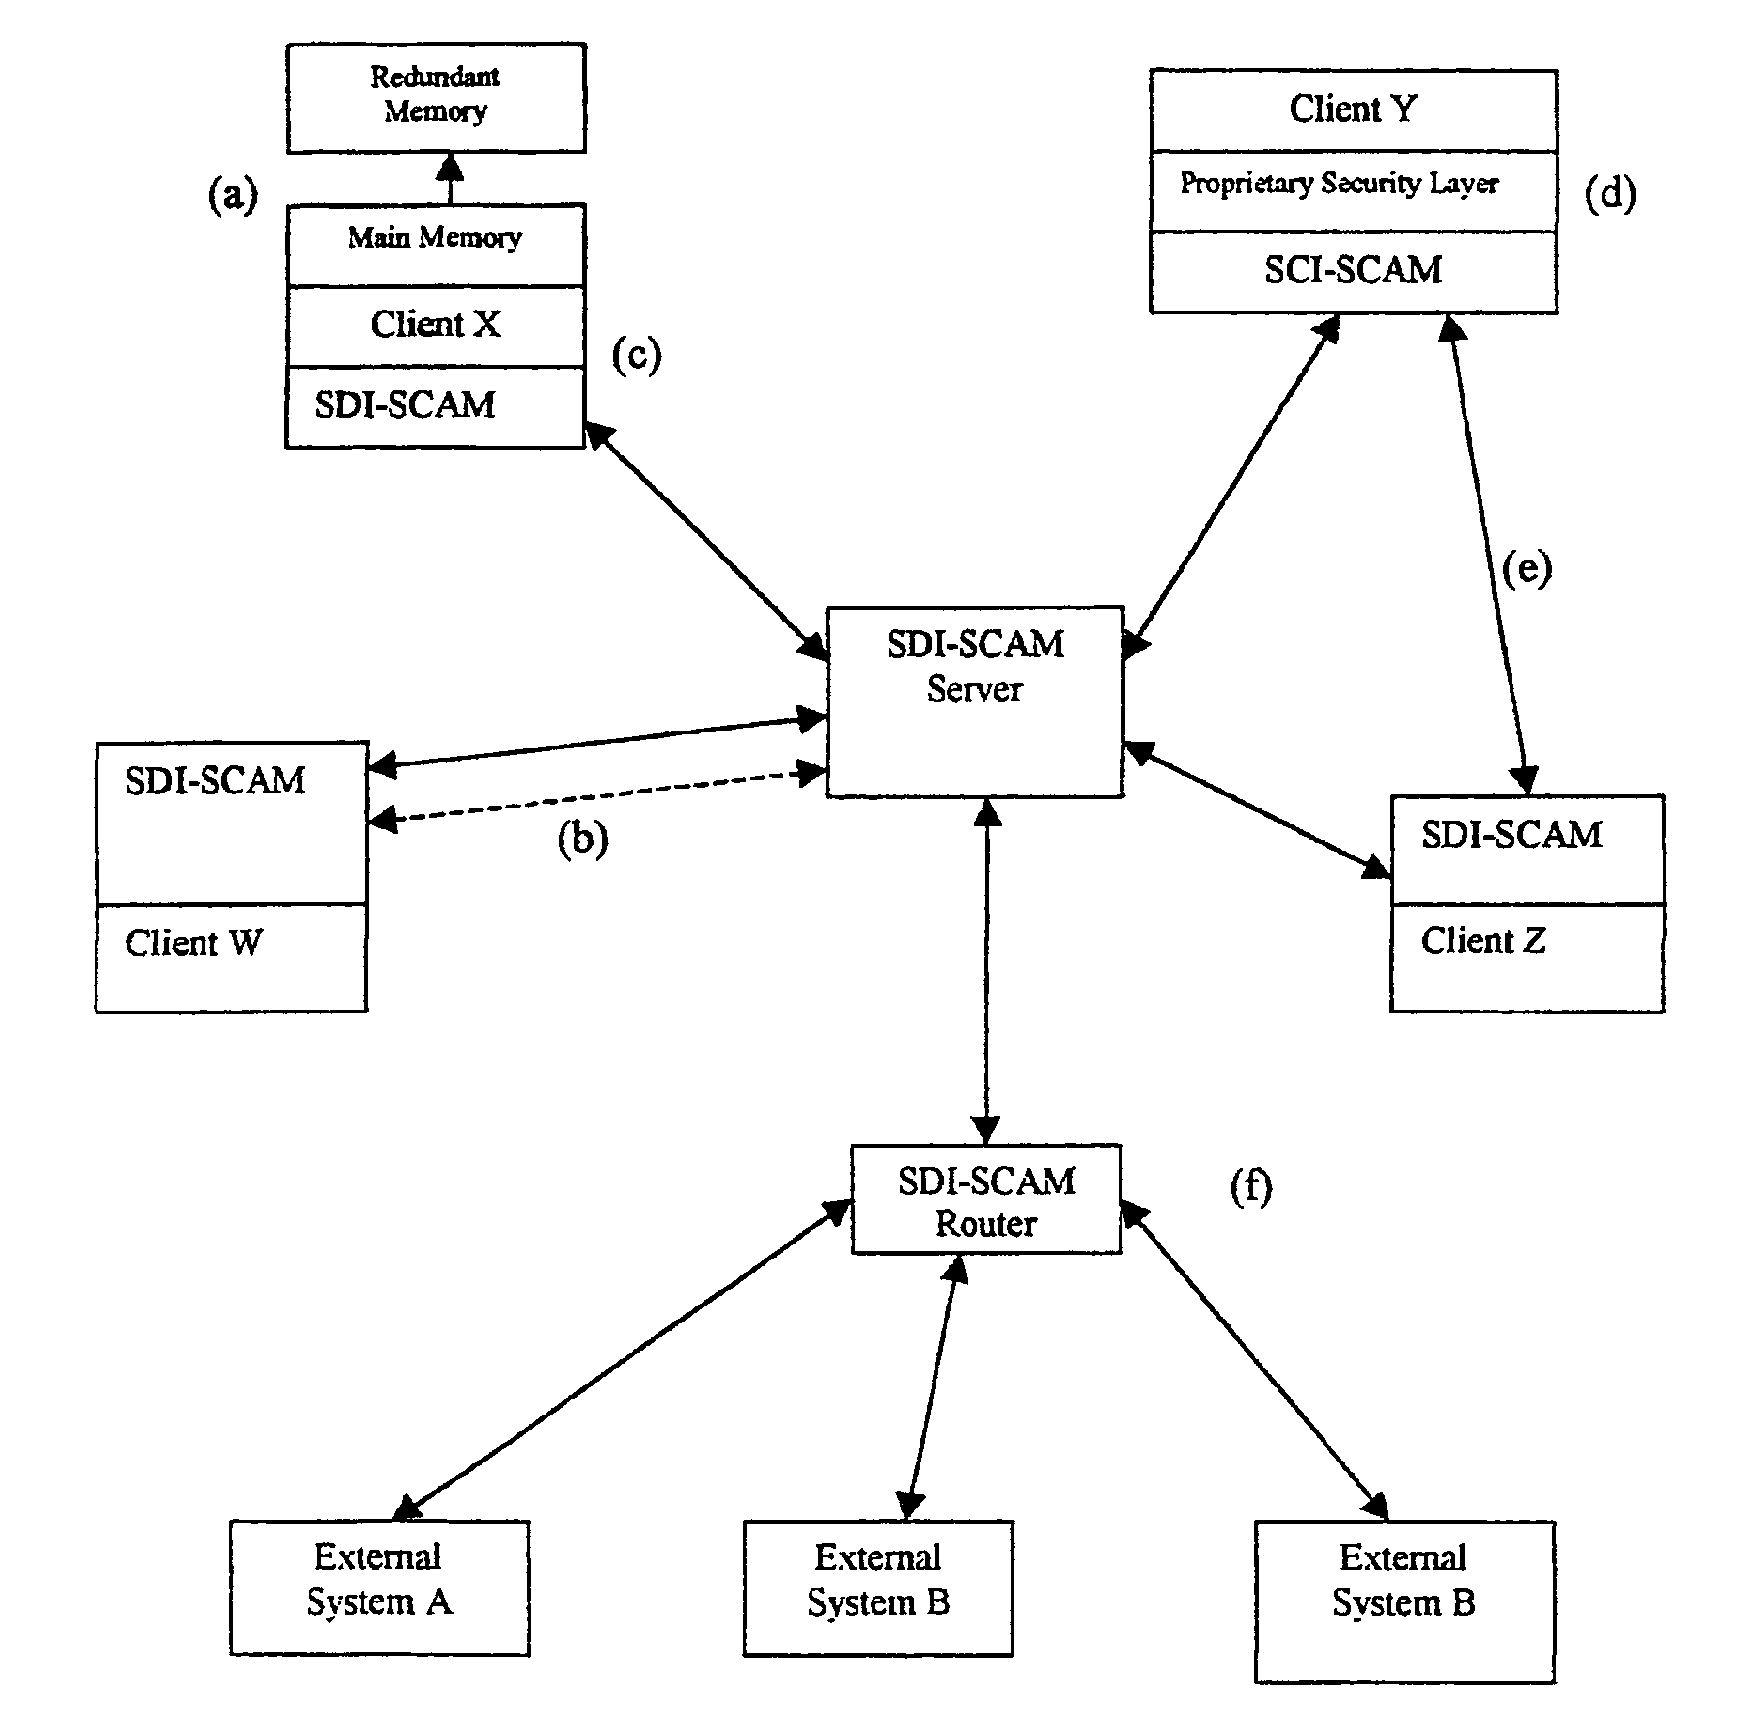 System and method for a distributed application and network security system (SDI-SCAM)